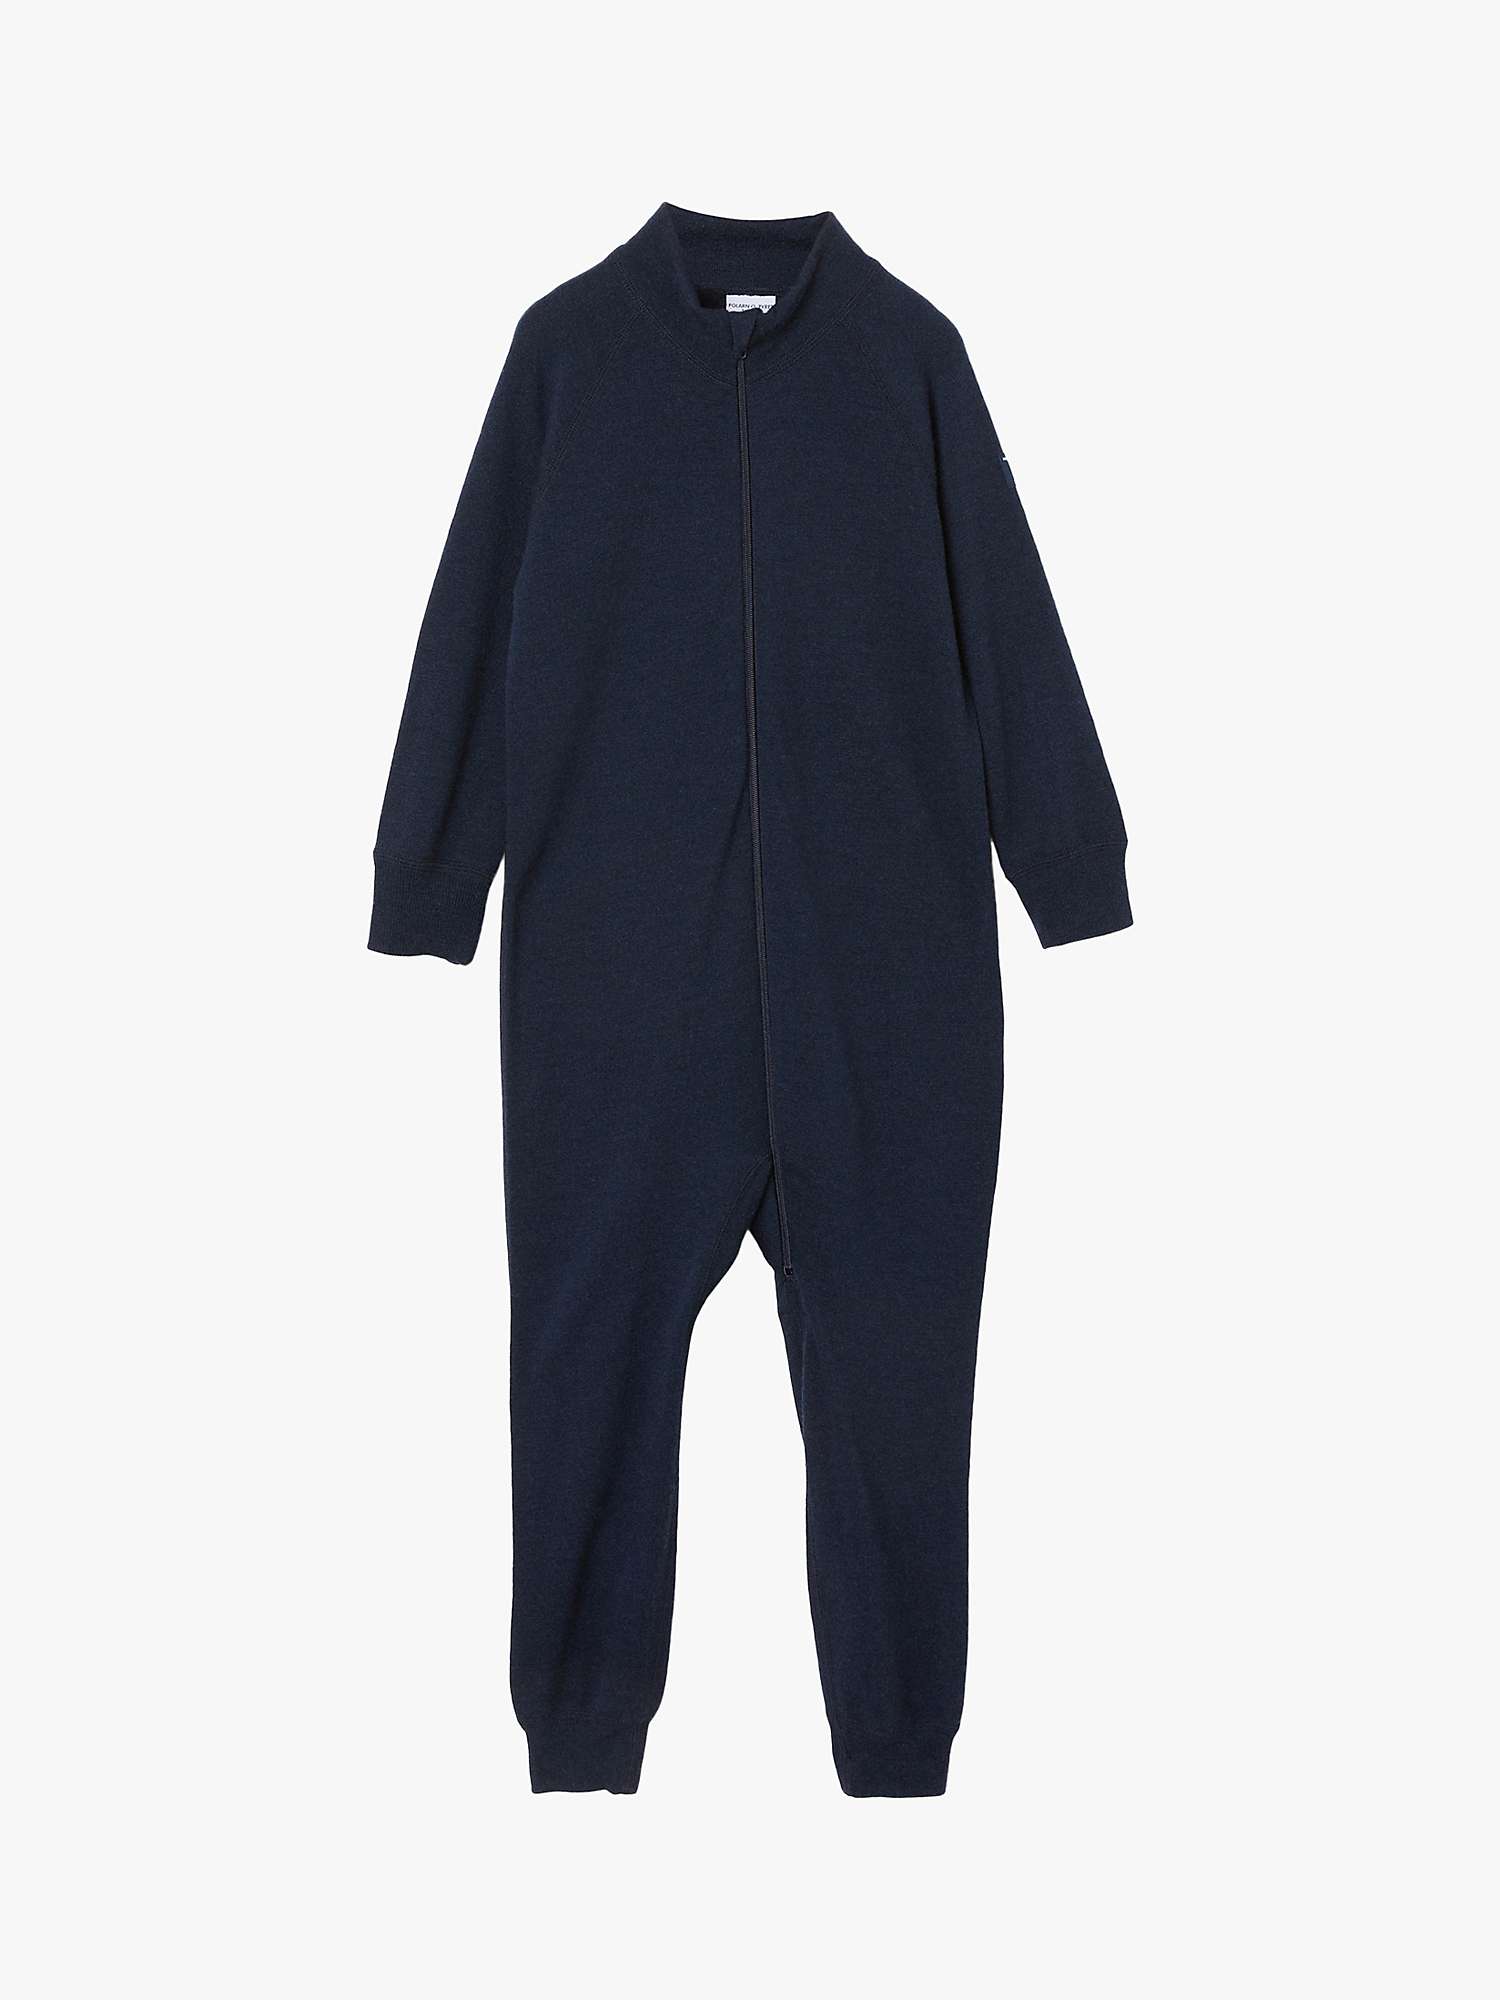 Buy Polarn O. Pyret Baby Merino Wool Terry Overall Romper Online at johnlewis.com